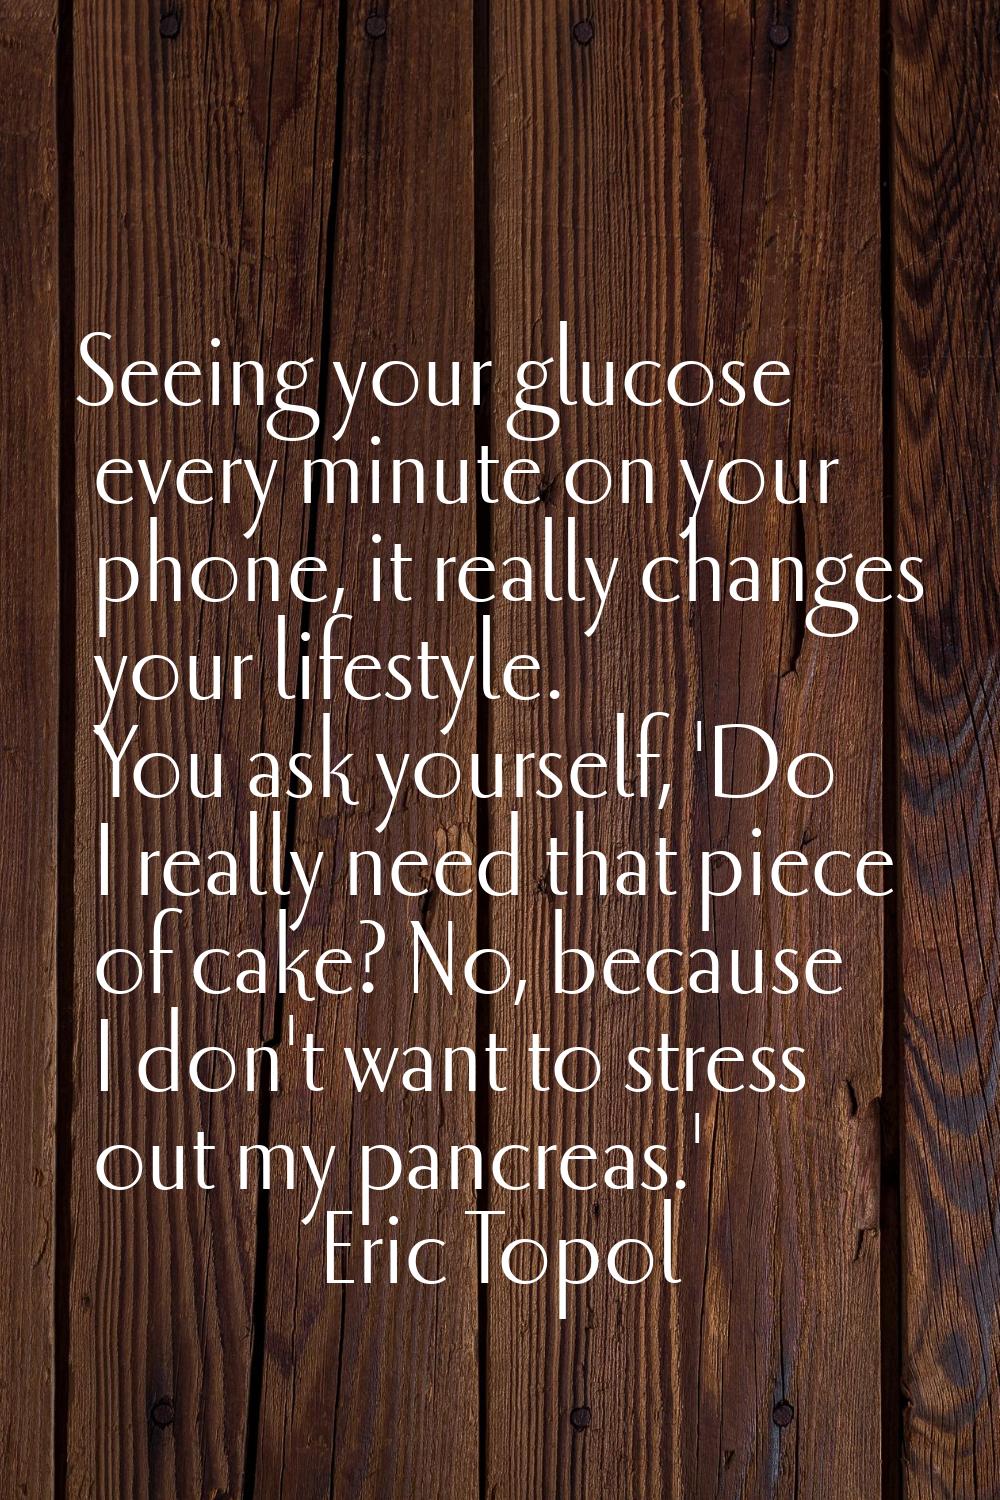 Seeing your glucose every minute on your phone, it really changes your lifestyle. You ask yourself,